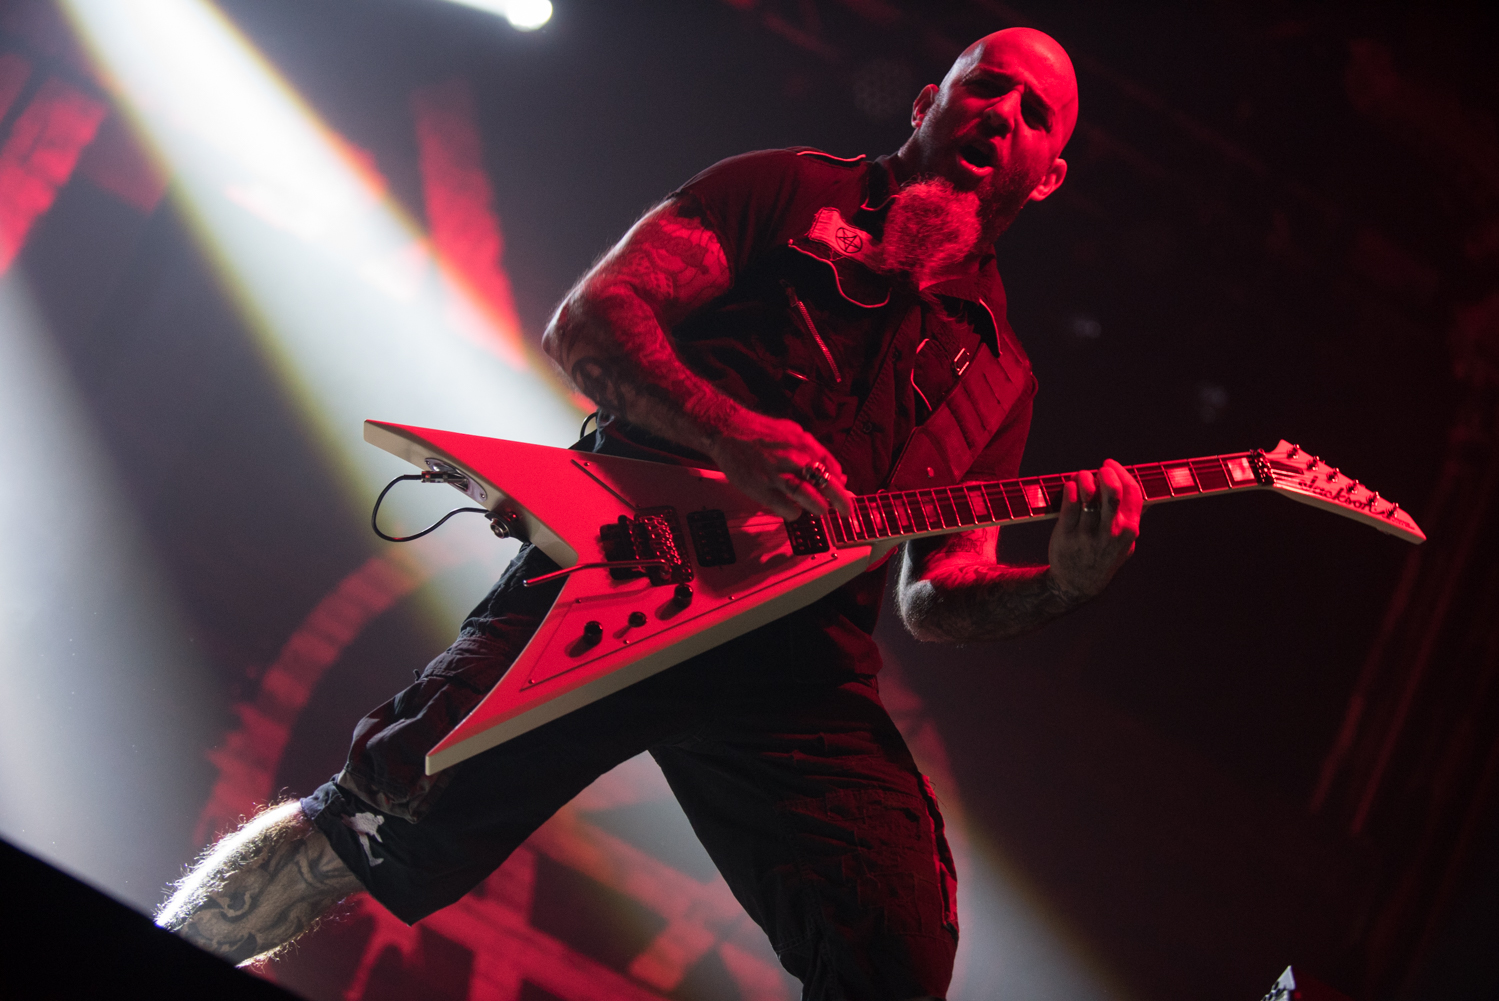 Big Four, Anthrax, Deliver A Powerful Performance in Chicago